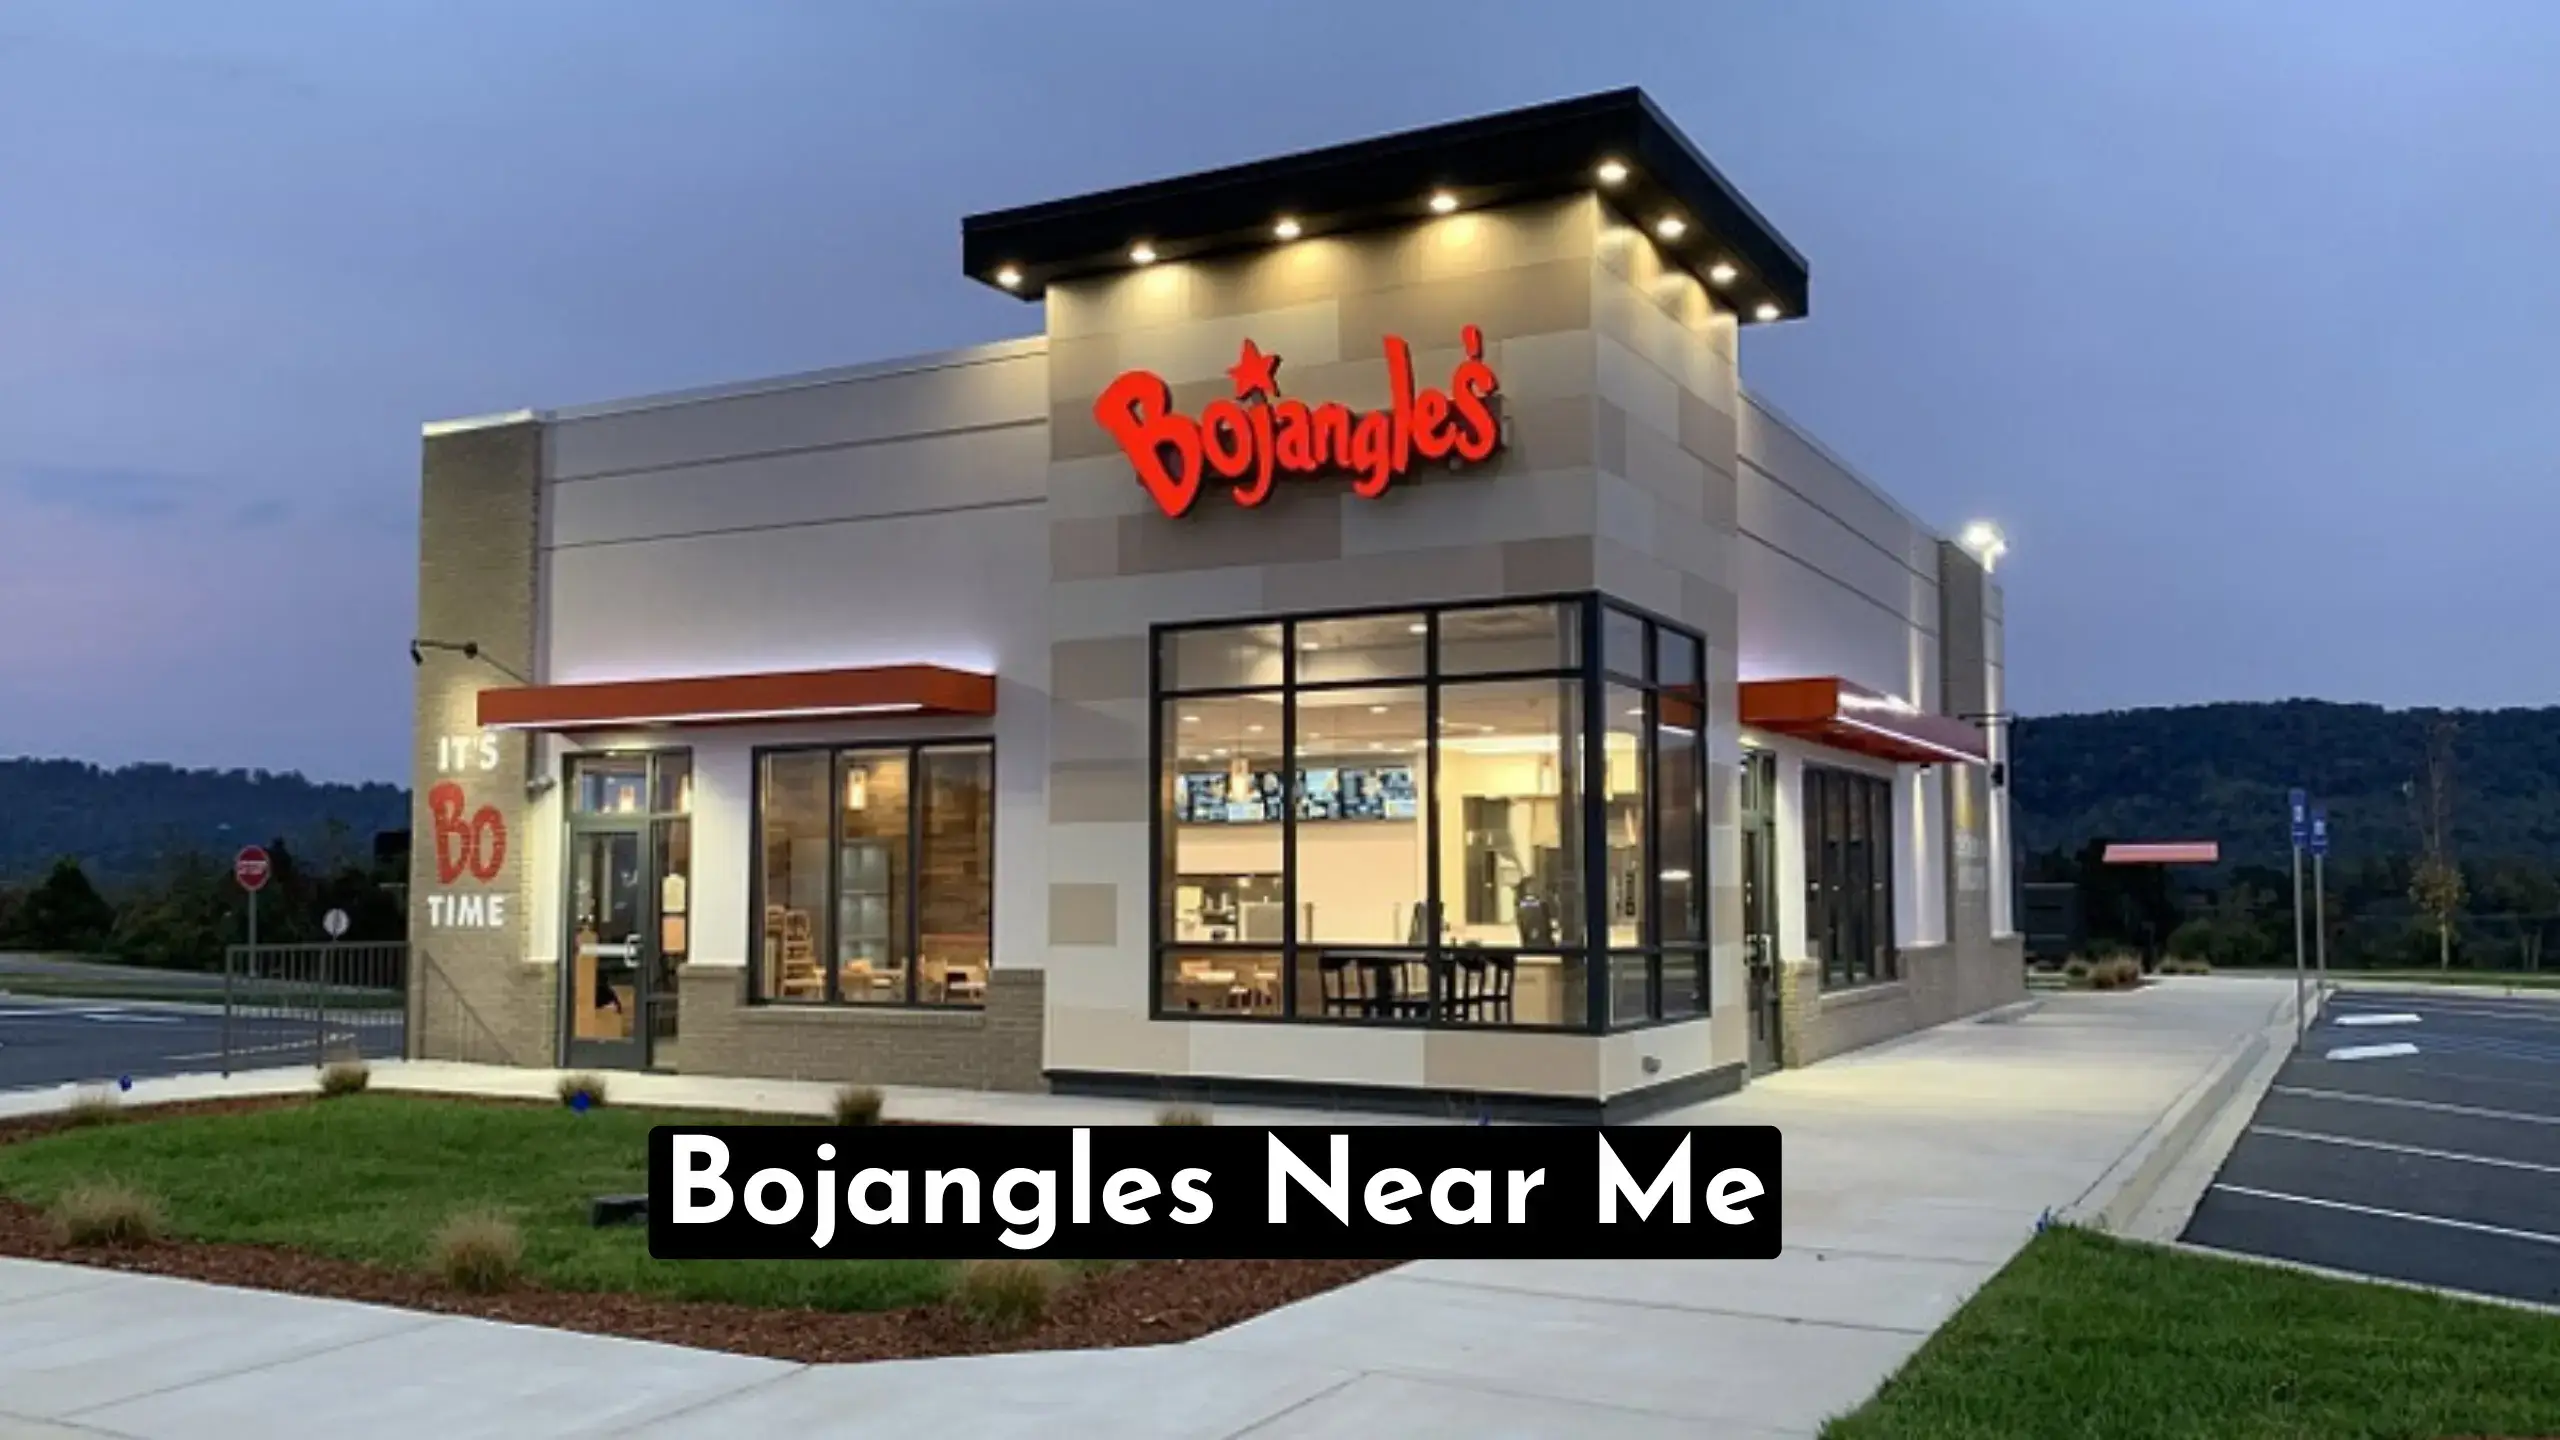 Bojangles Near Me: Find Delicious Fried Chicken